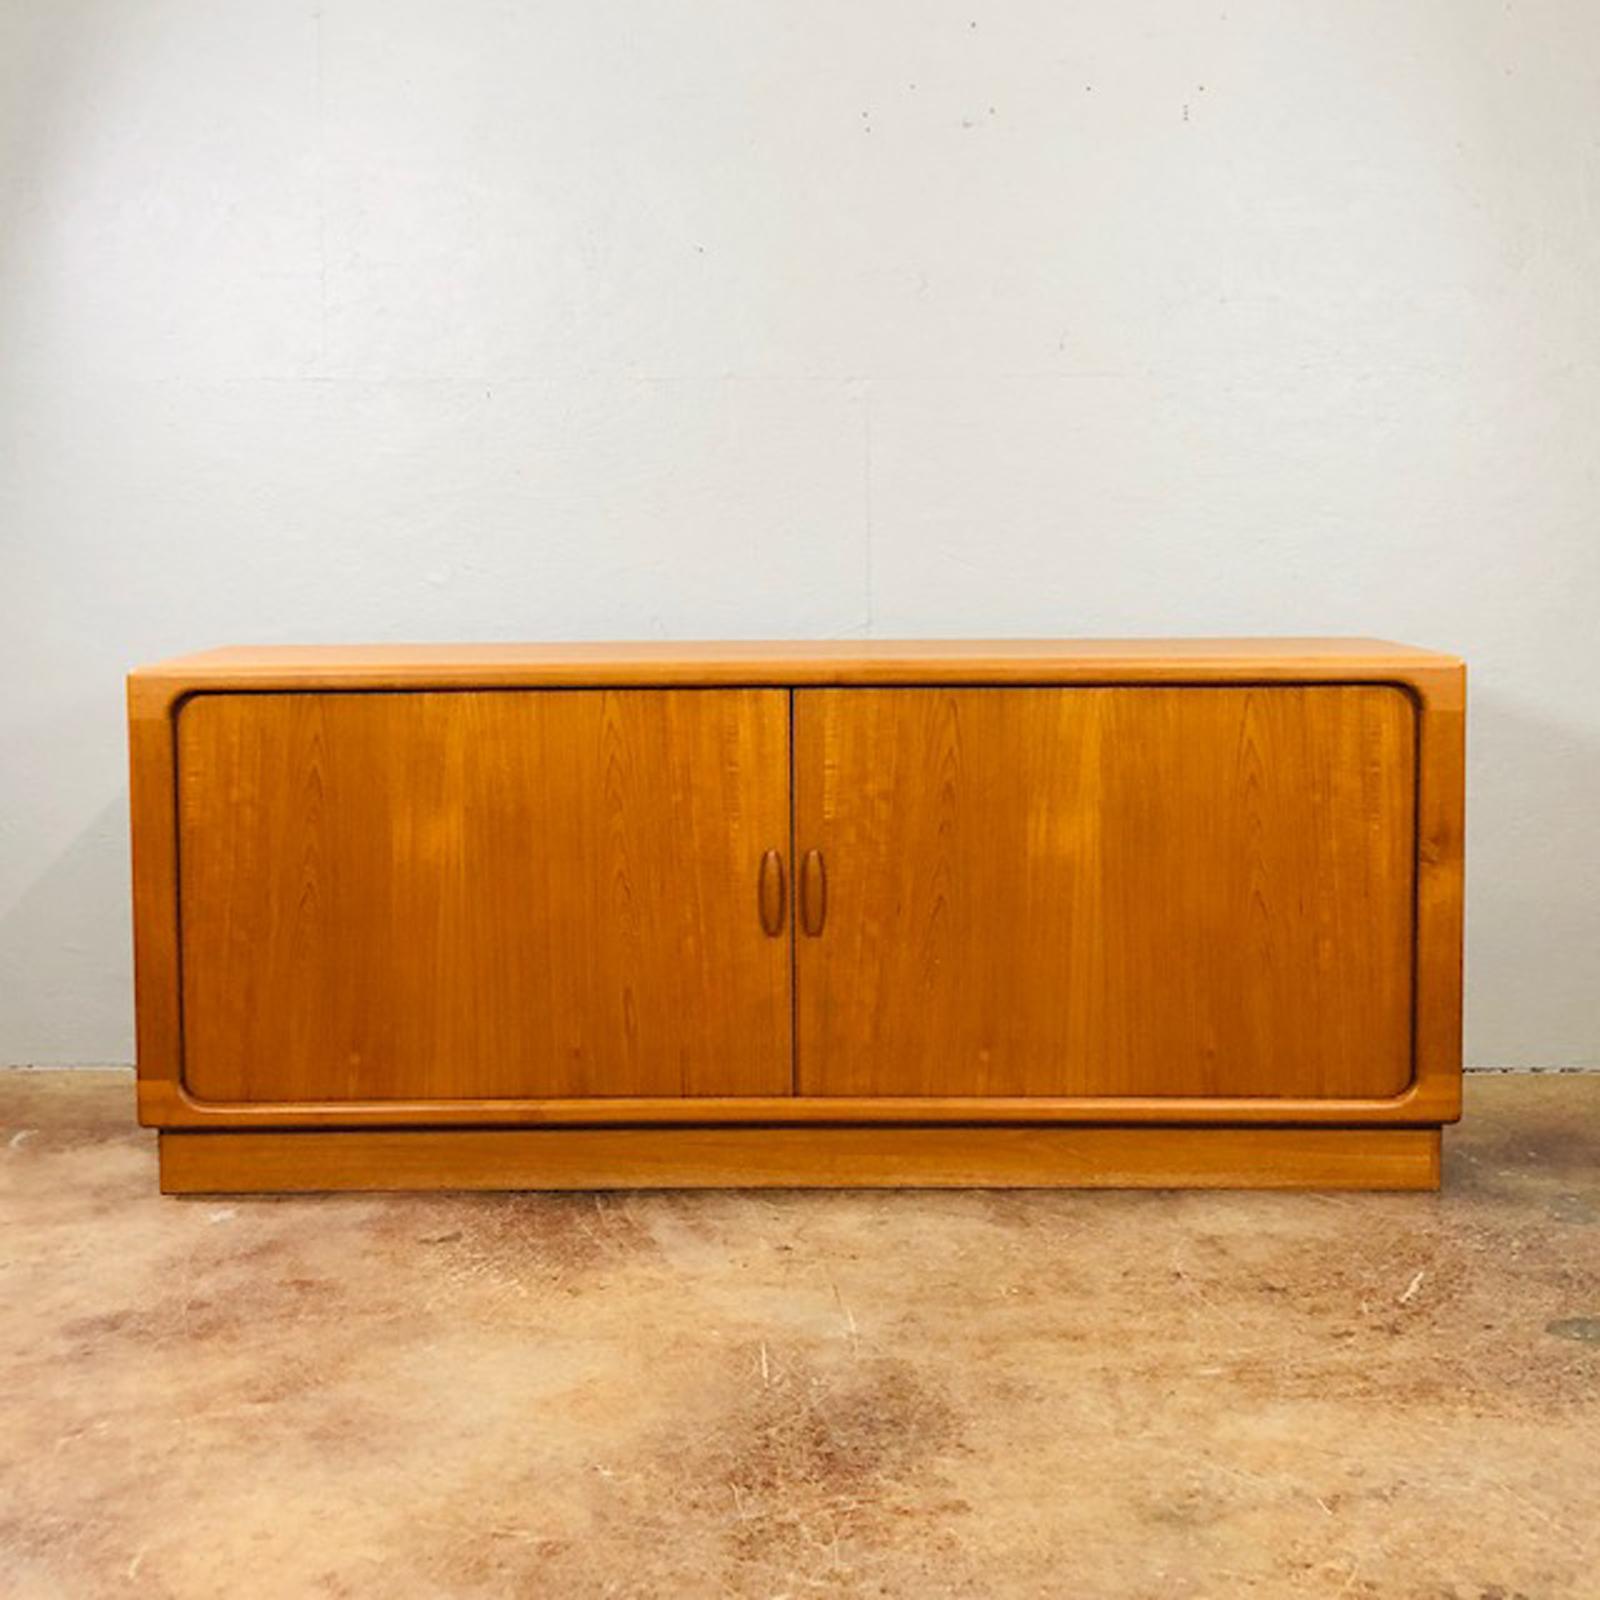 Early 1960s teak credenza by Dyrlund of Denmark. Clean with sculptural lines. Timeless modern. Original very good condition.